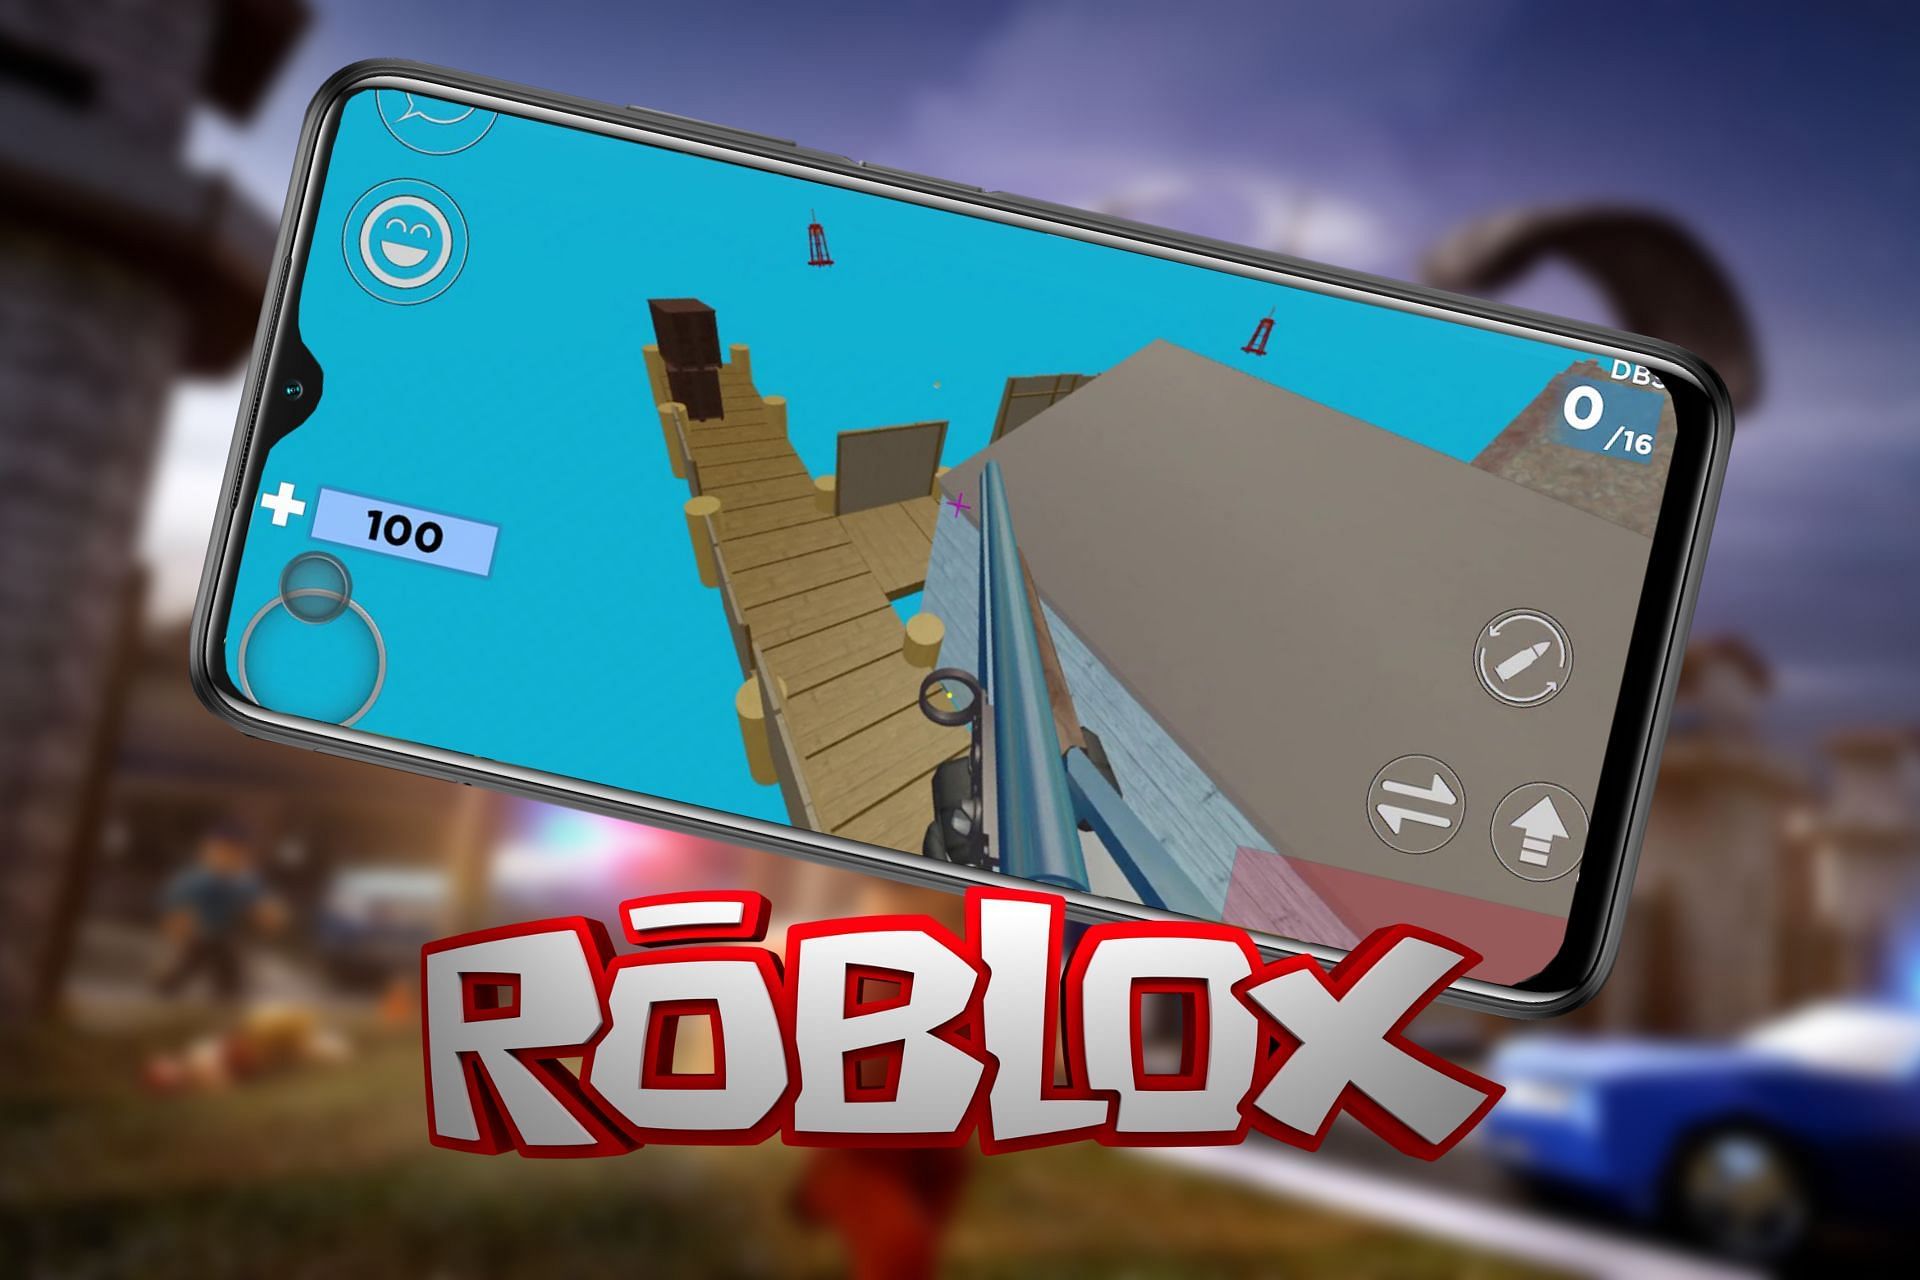 Android phones are great for games like Roblox (Image via Sportskeeda)